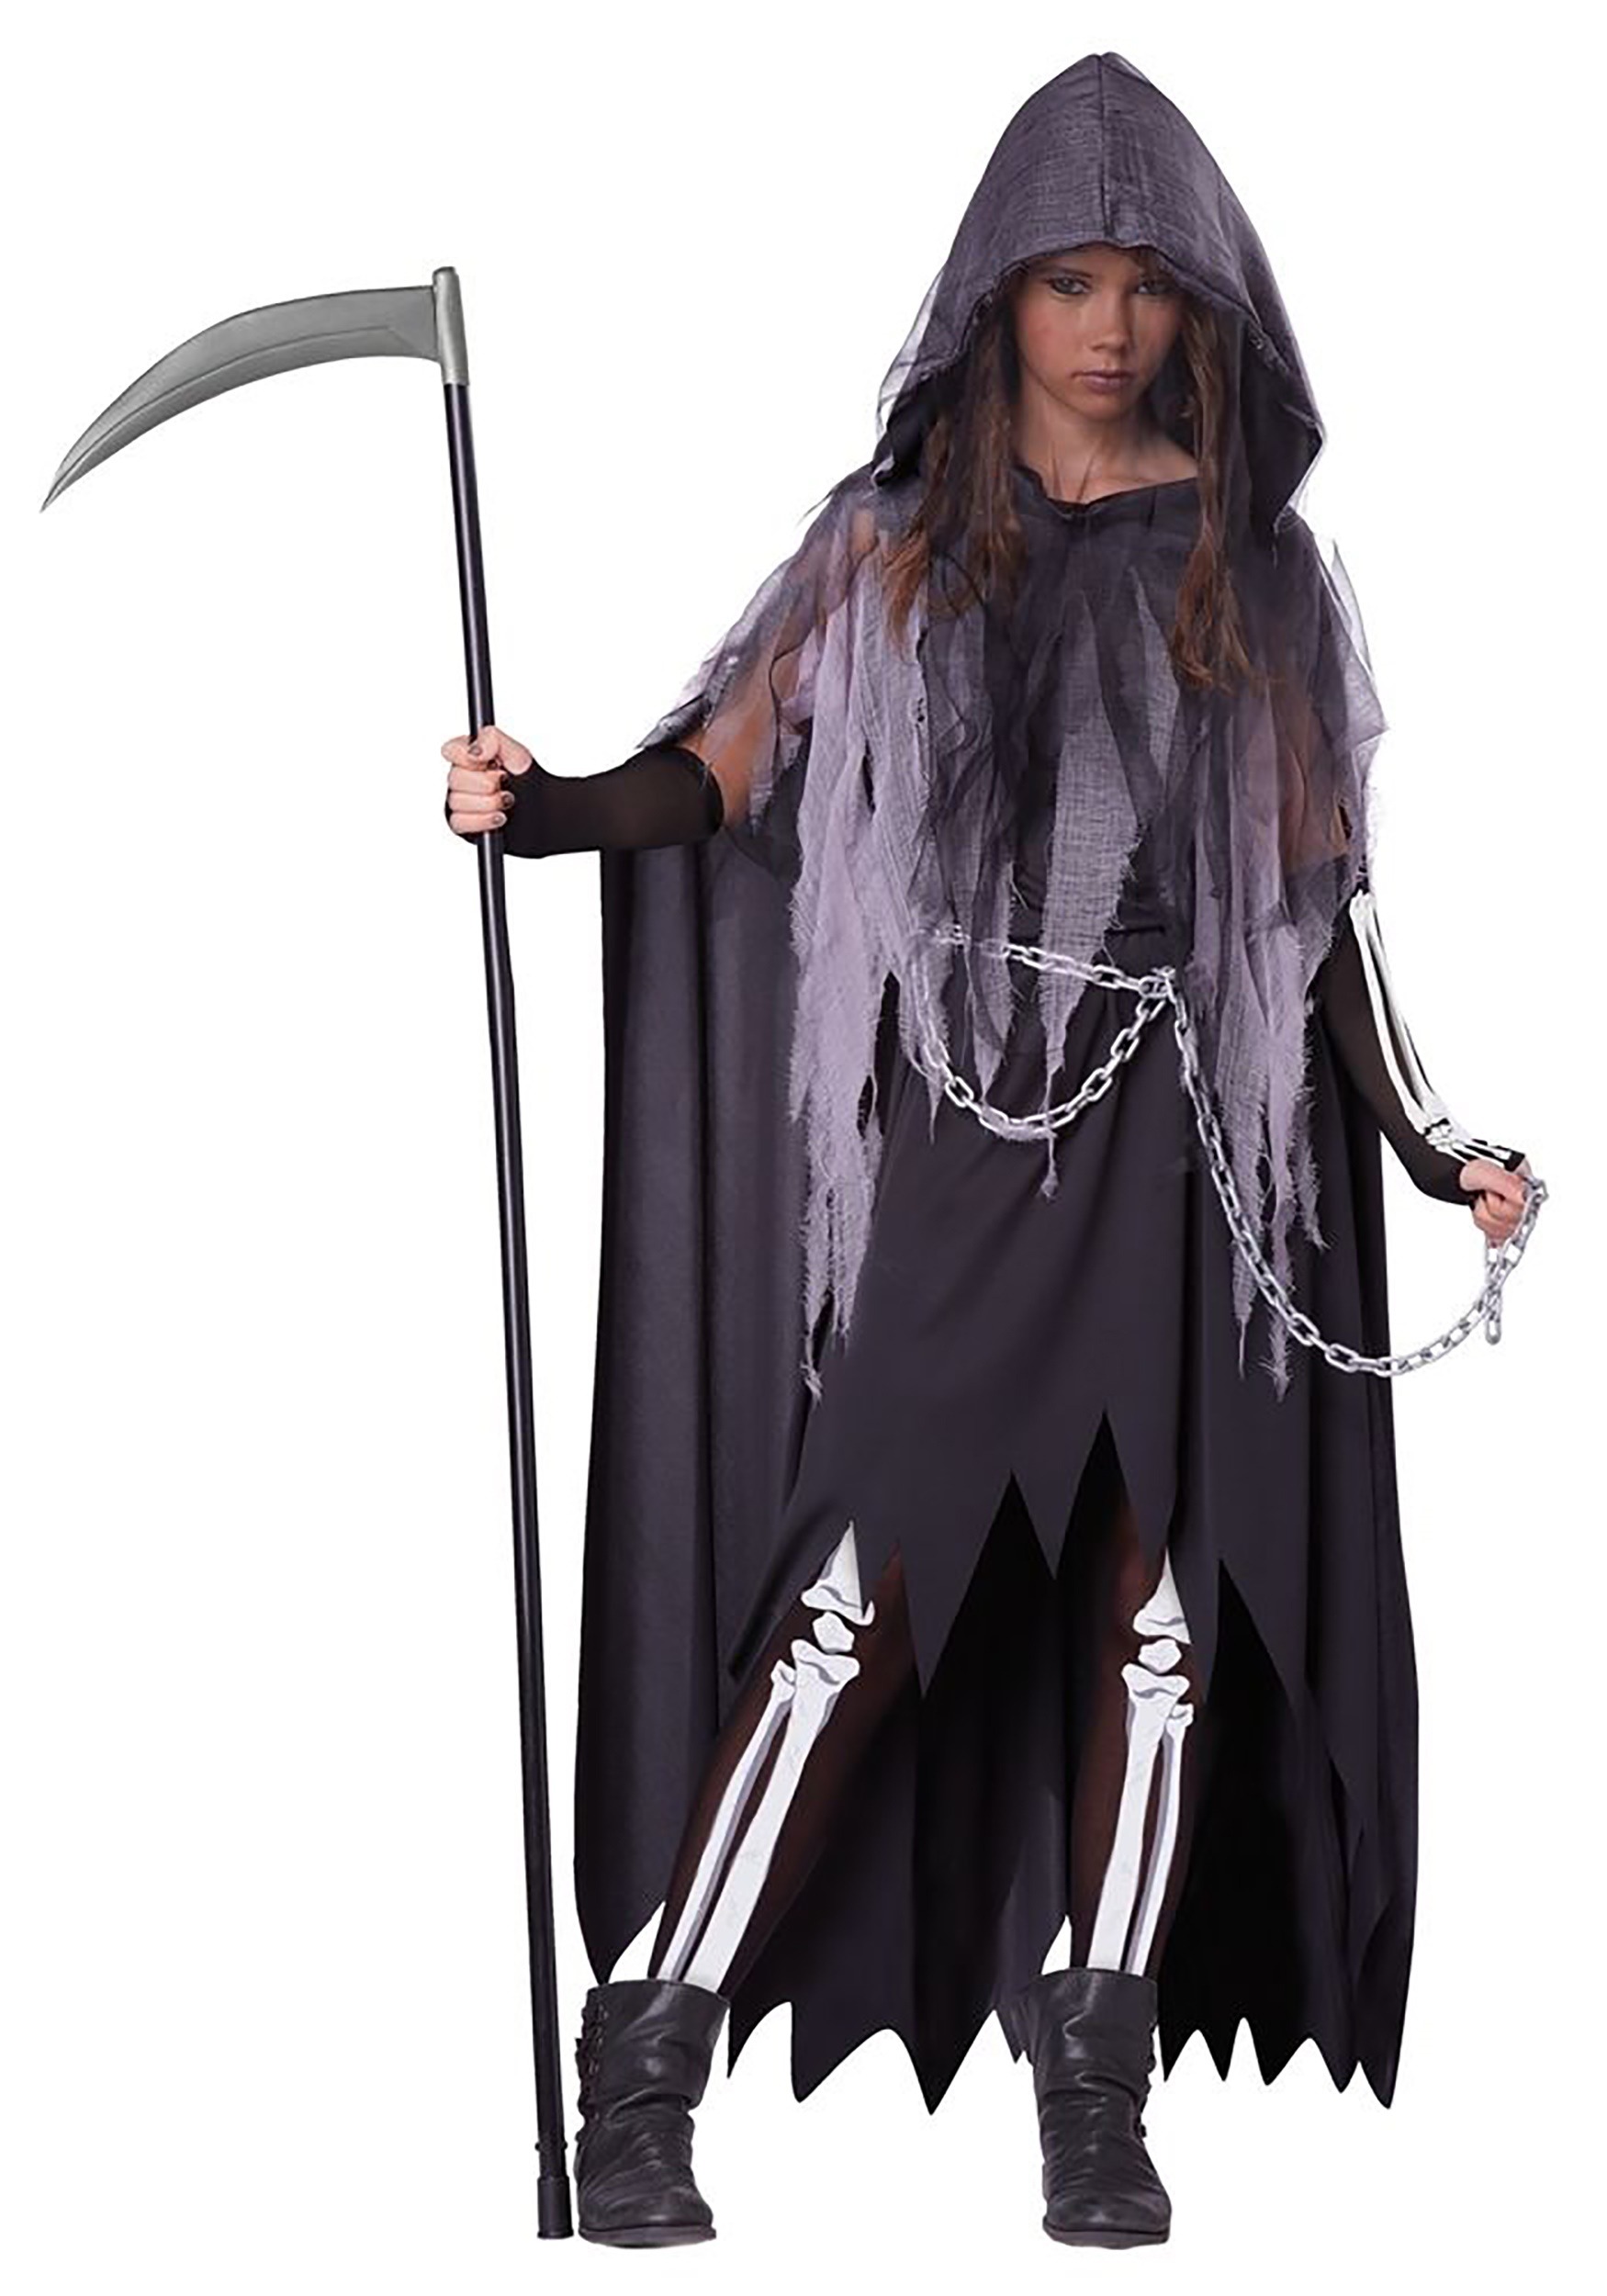 Photos - Fancy Dress California Costume Collection Tween Miss Reaper Costume for Girls | Gothic 